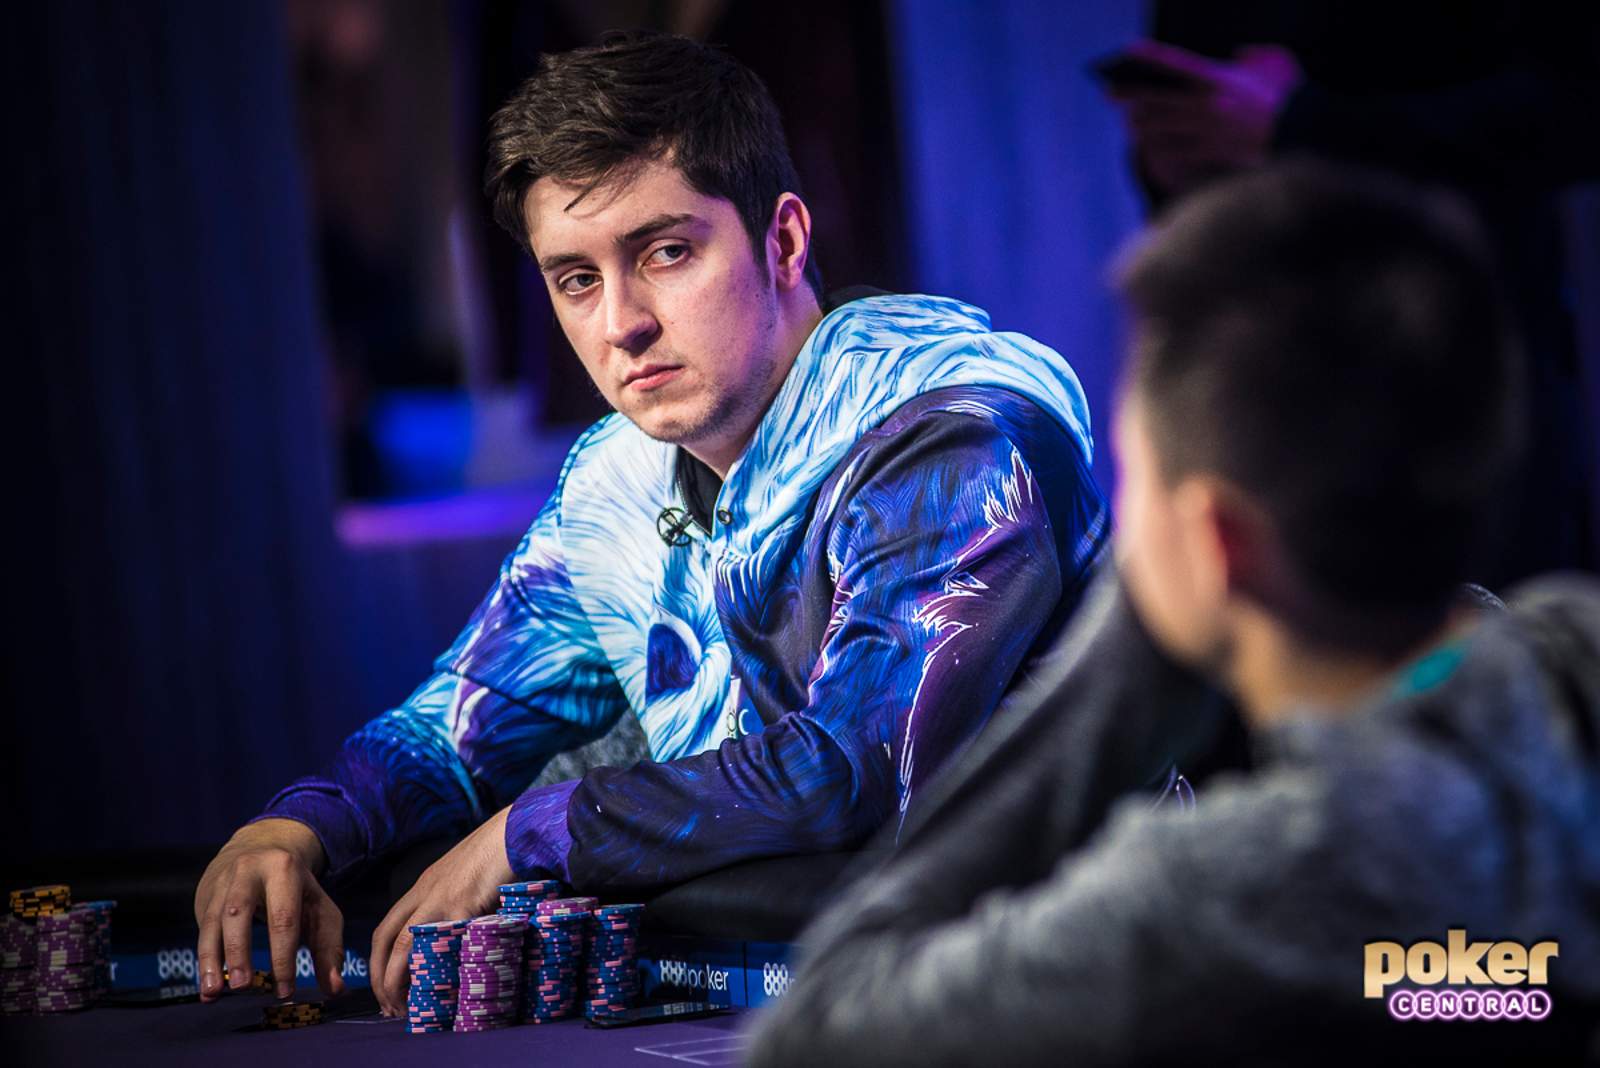 Home Field Advantage Helps Ali Imsirovic in Super High Roller Bowl Debut